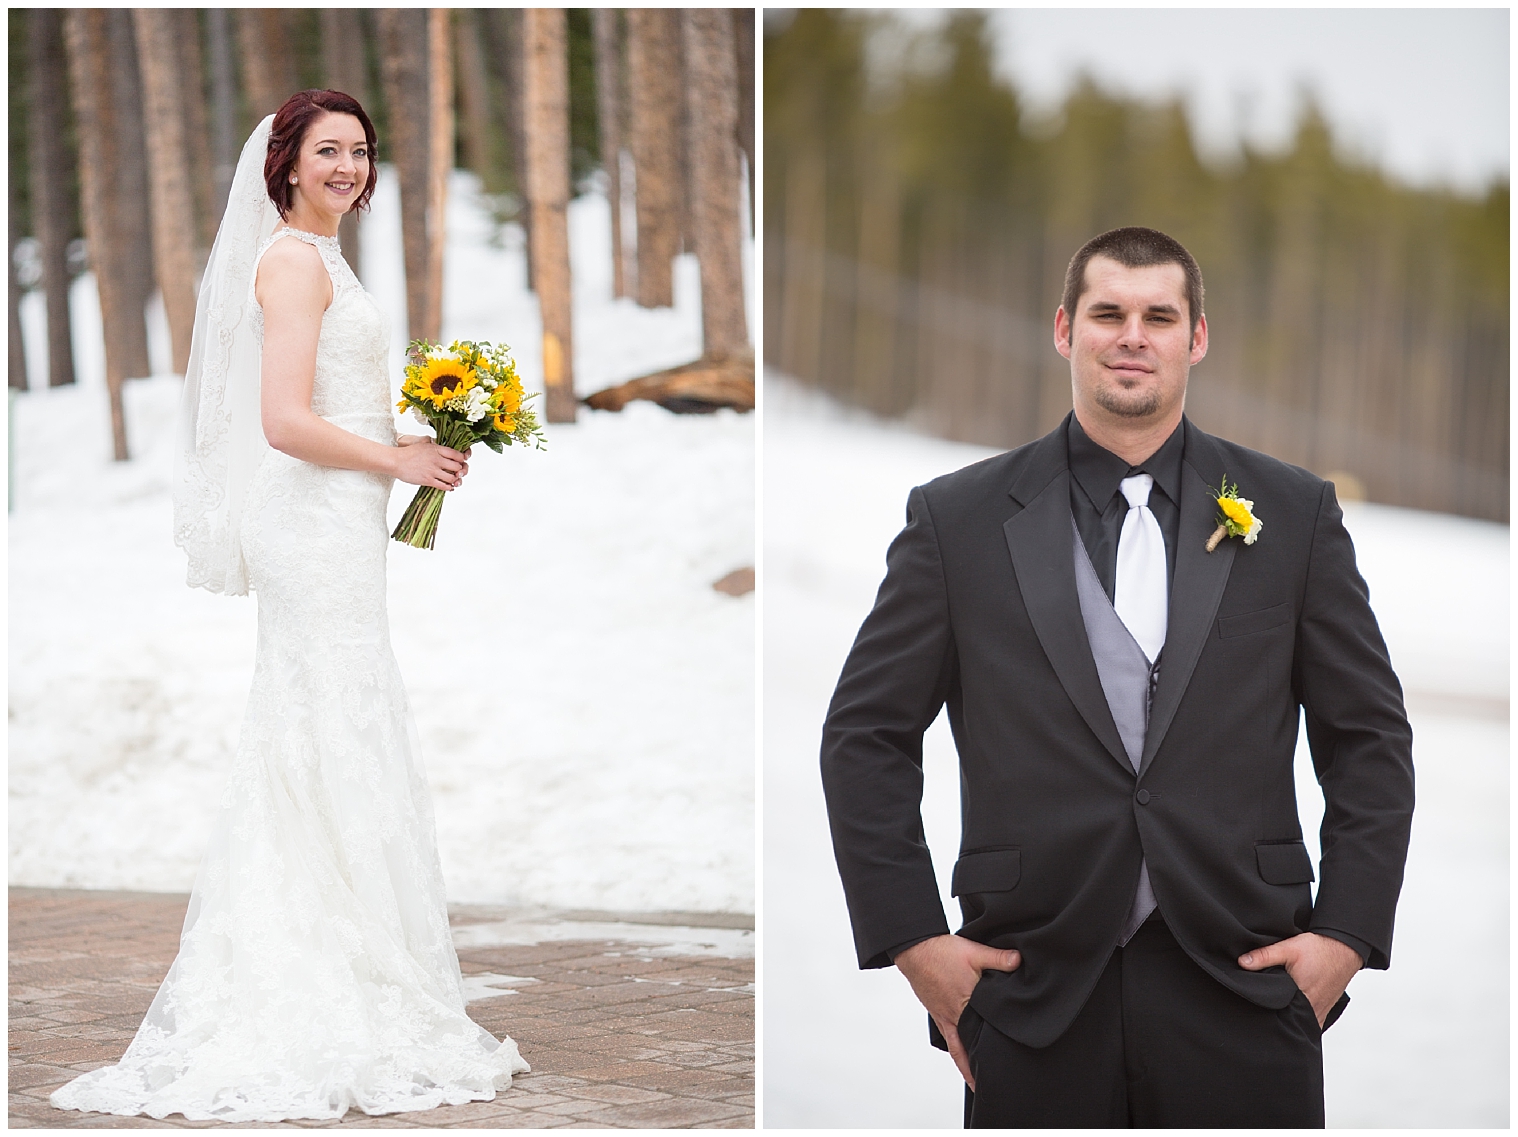 Portraits of the bride and groom at their winter Breckenridge wedding.